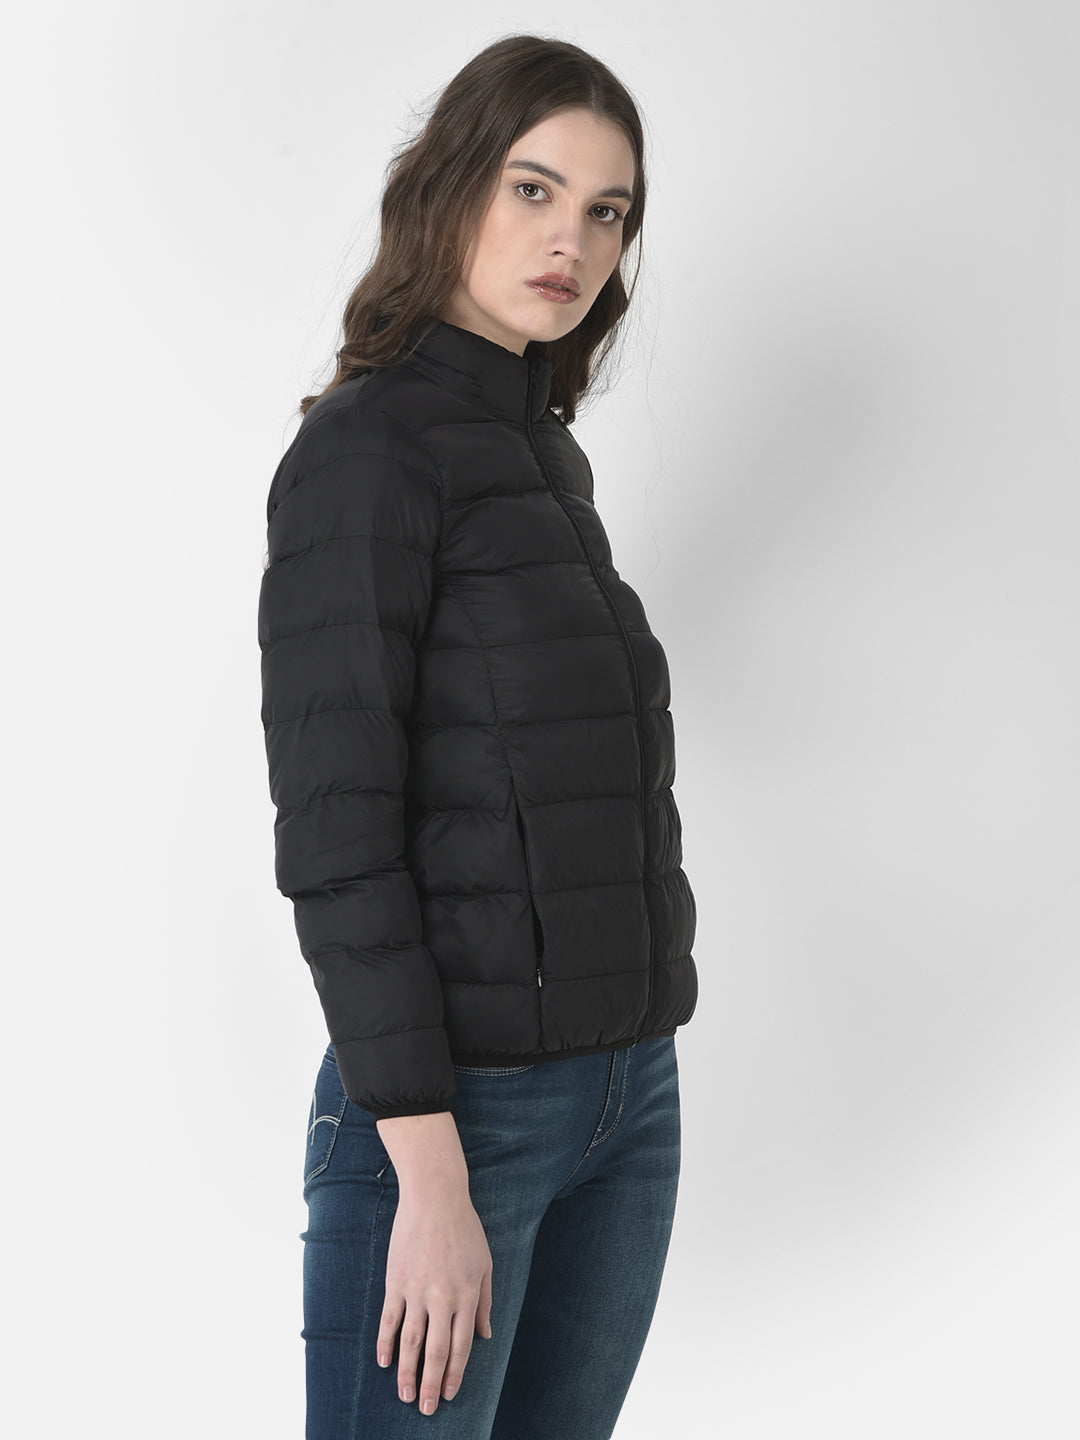  Black Quilted Jacket 